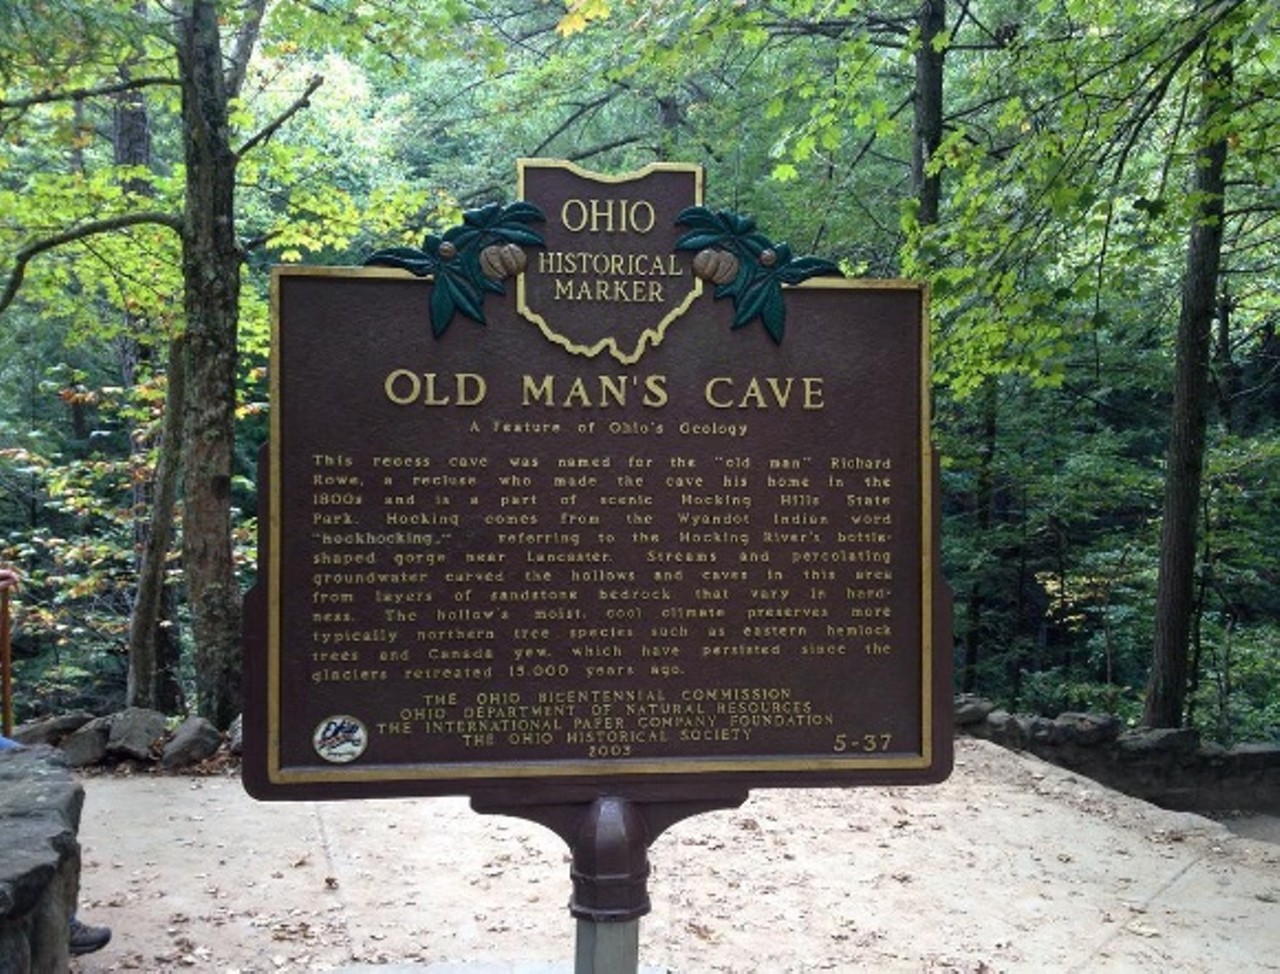  Old Man&#146;s Cave
Hocking Hills State Park - 19852 Ohio 664, Logan, 740-385-6517
Hocking Hills State Park has quite a few caves and caverns accessible to the public. Old Man&#146;s Cave, named after an actual hermit who used to live here, is one of the most popular and guests can spend hours exploring every nook and cranny.  The drive is about three hours away from Cleveland, then take the Grandma Gatewood Trail.
Photo via shilohhawkins/Instagram